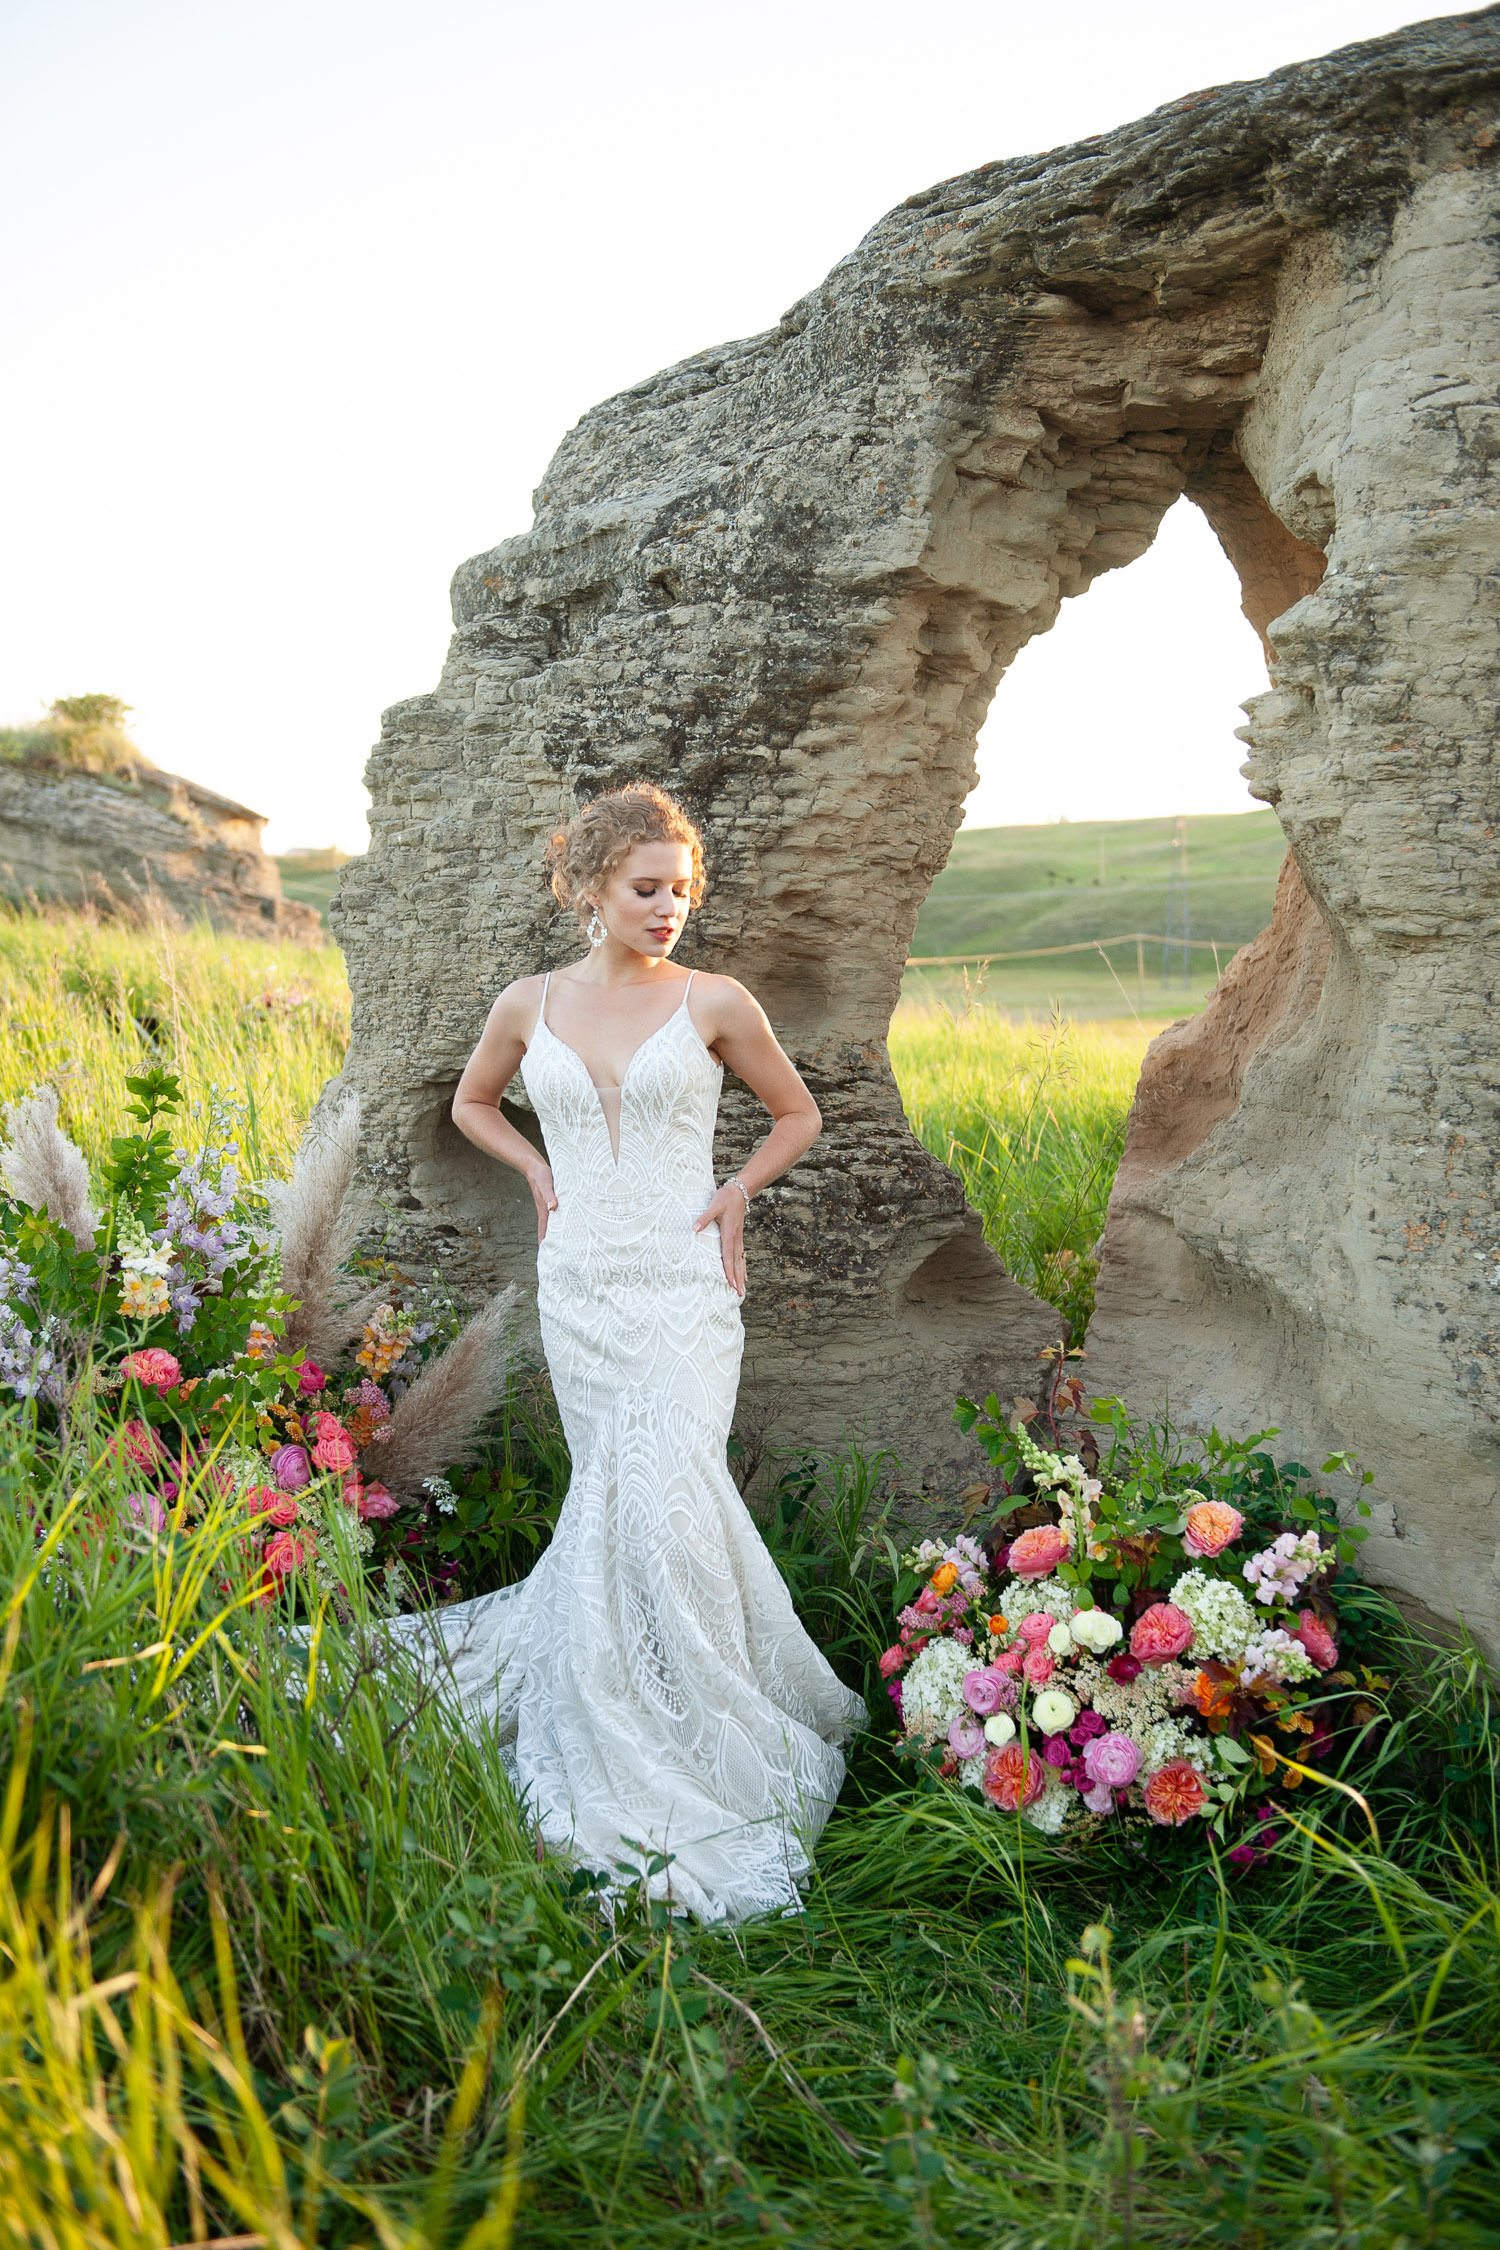 Bride stands at ceremony site captured by Tara Whittaker Photography